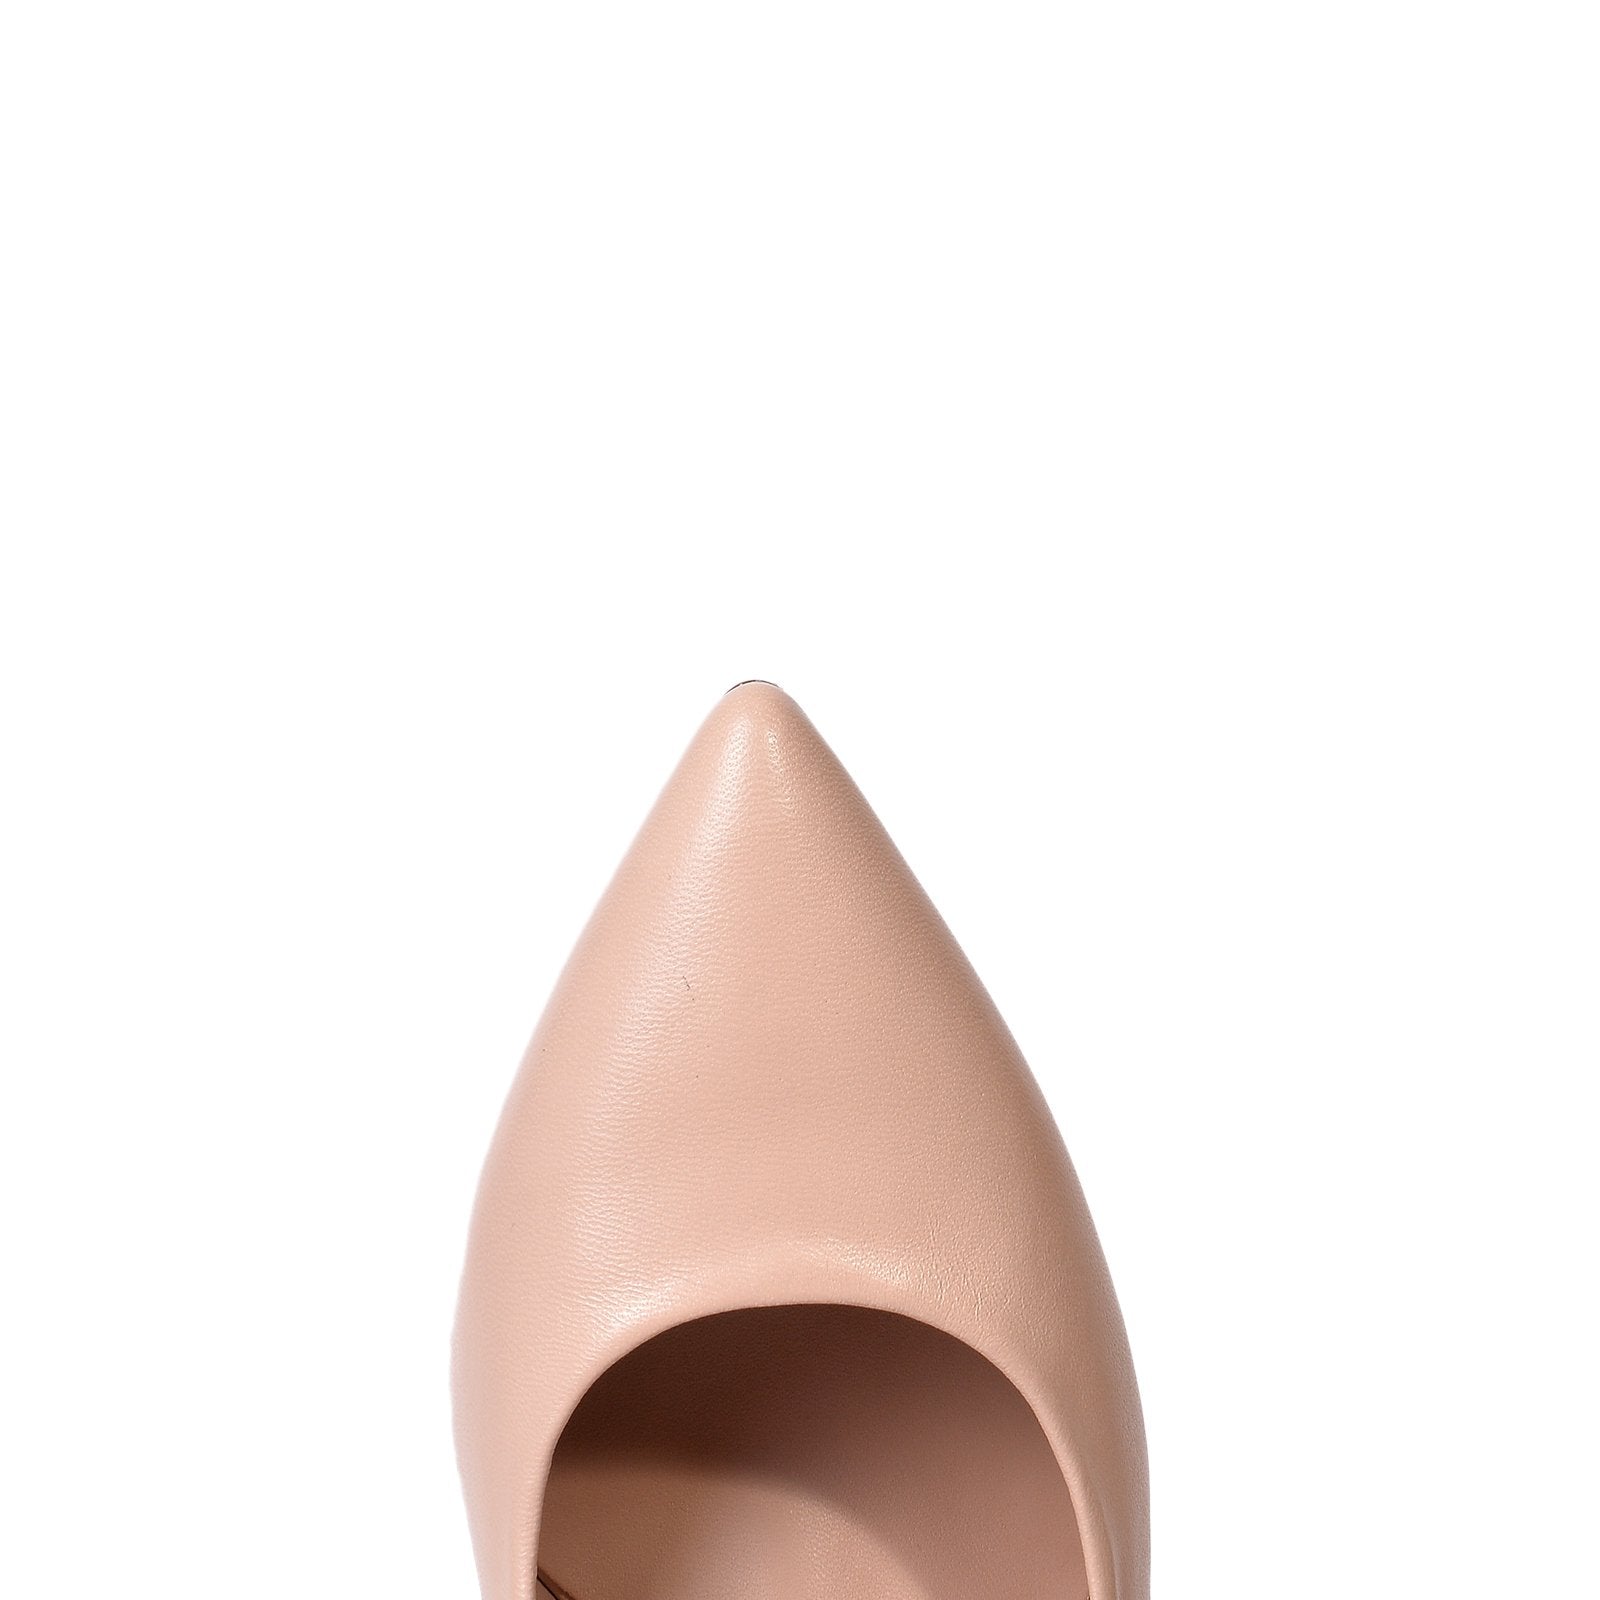 Rosa Nude Leather Pumps Heels 790-004-1 - 5